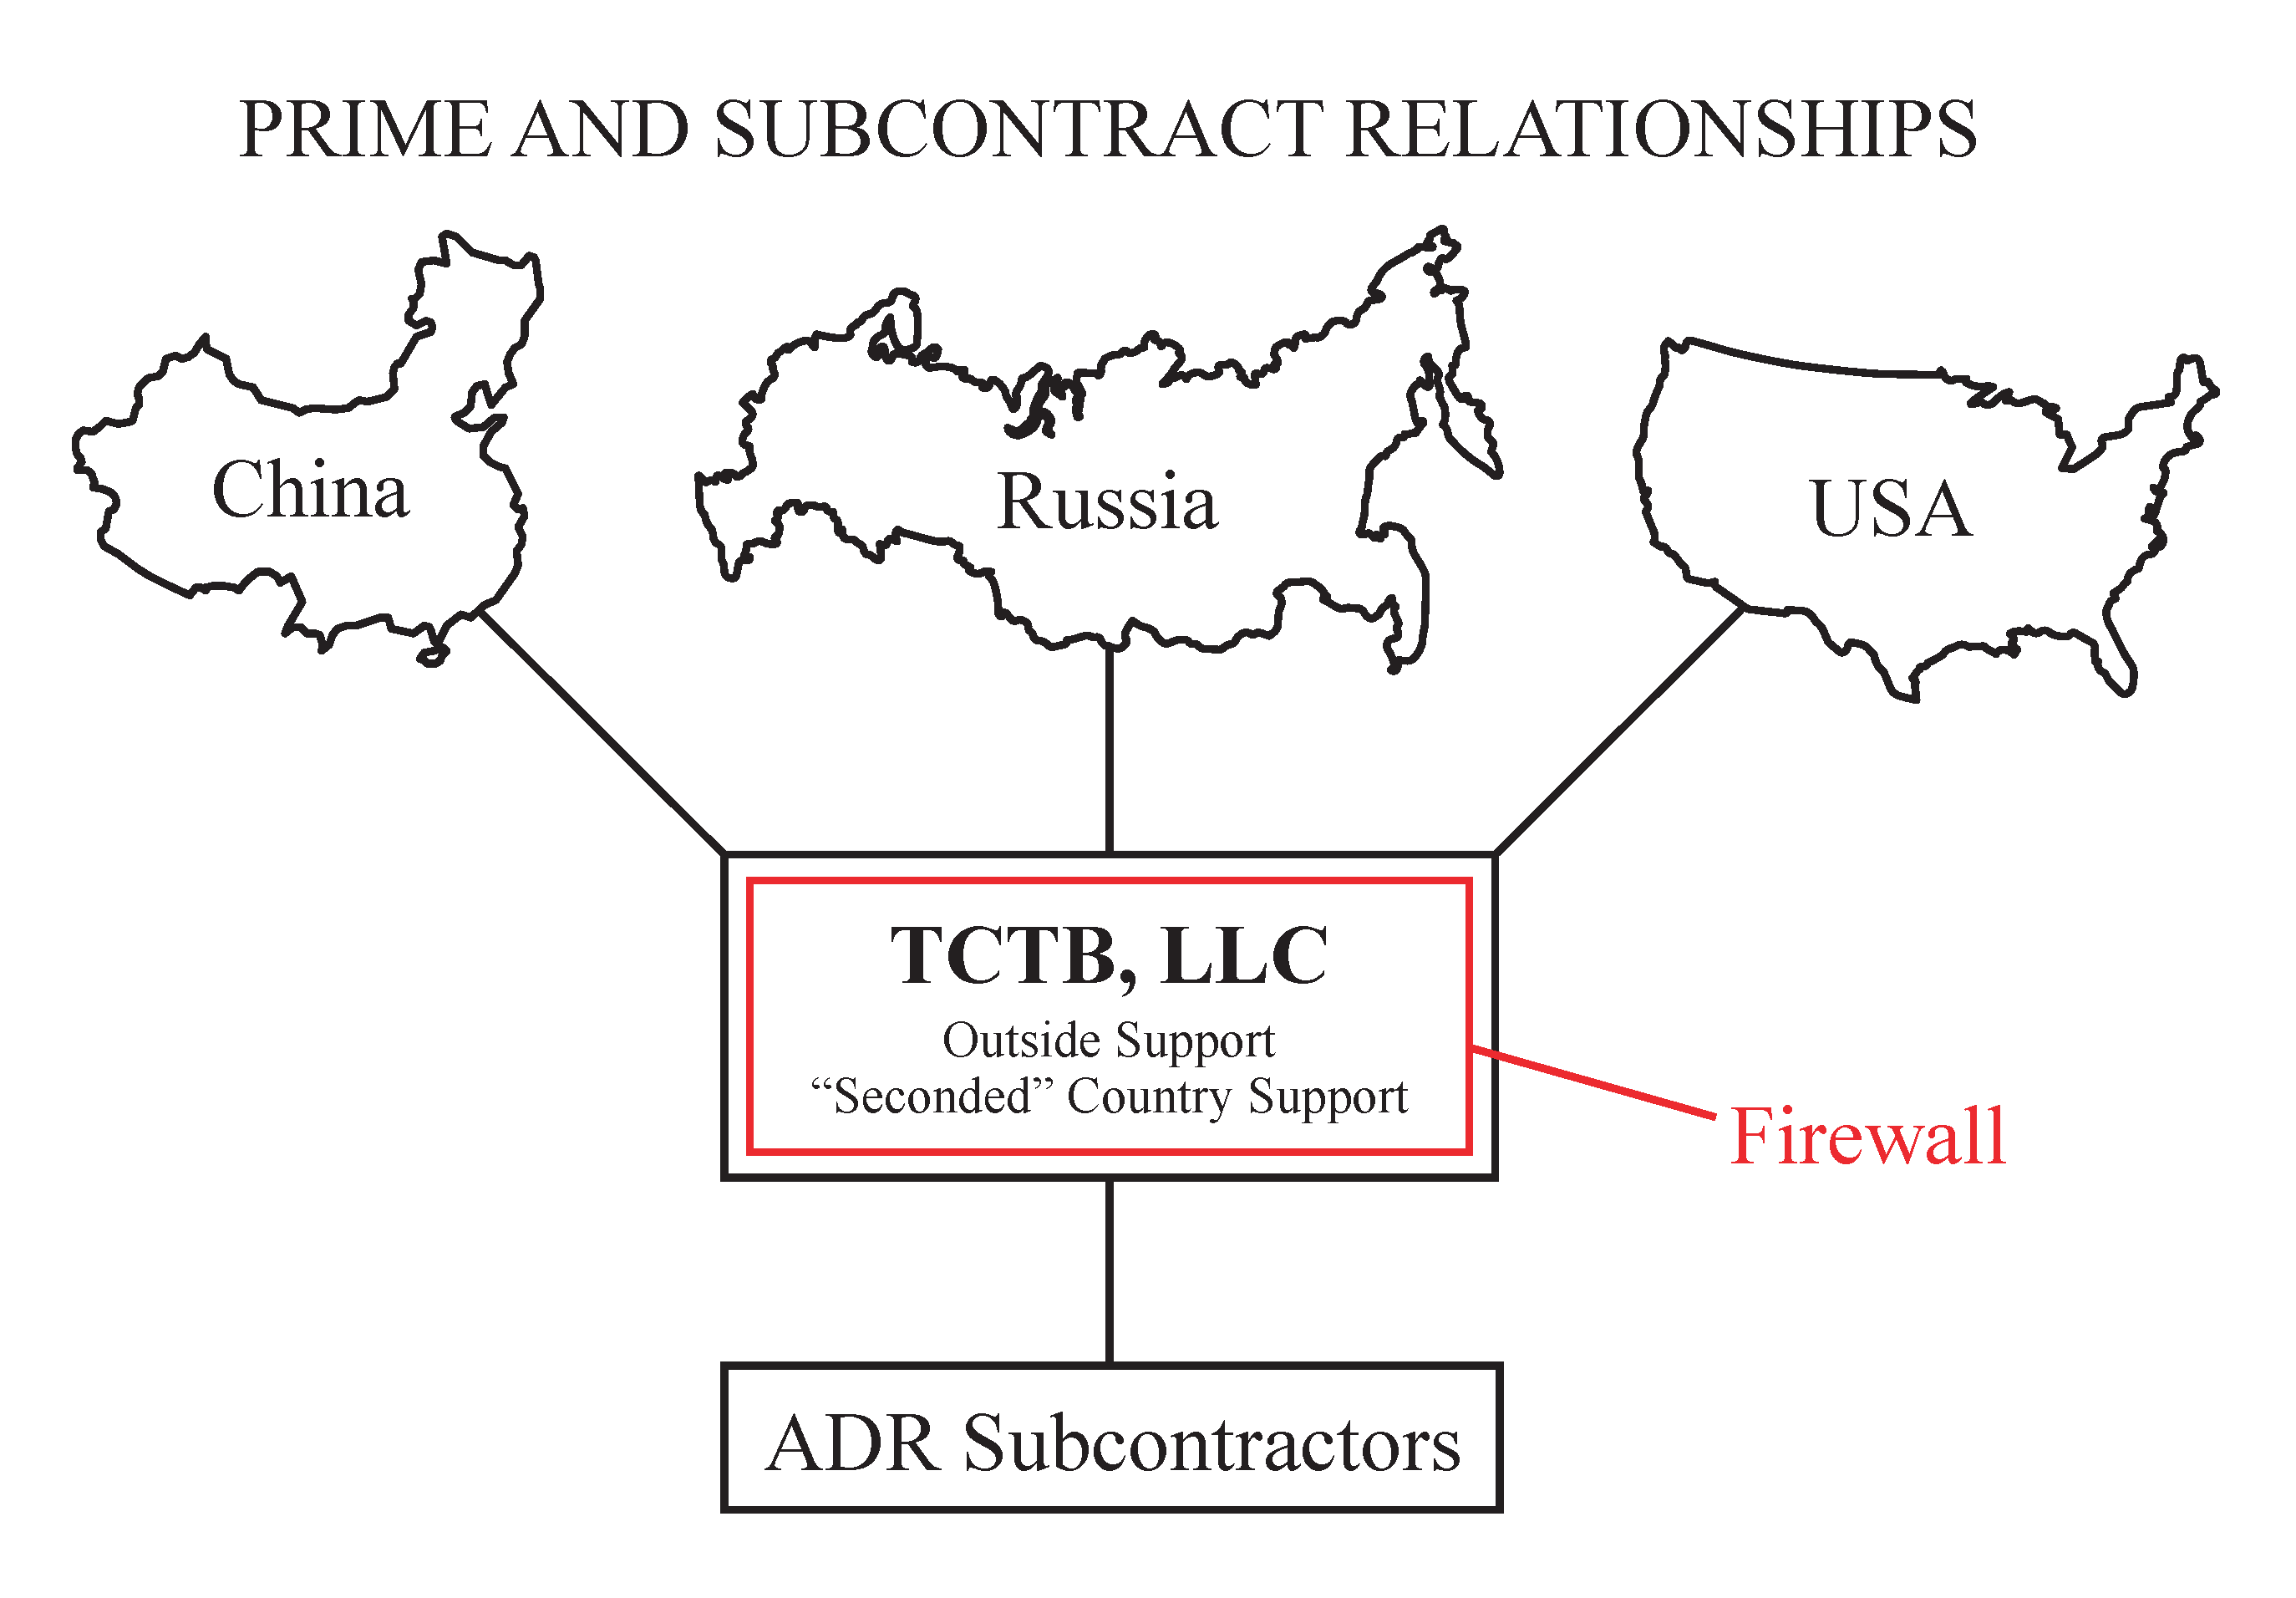 Prime and Subcontract Relationships